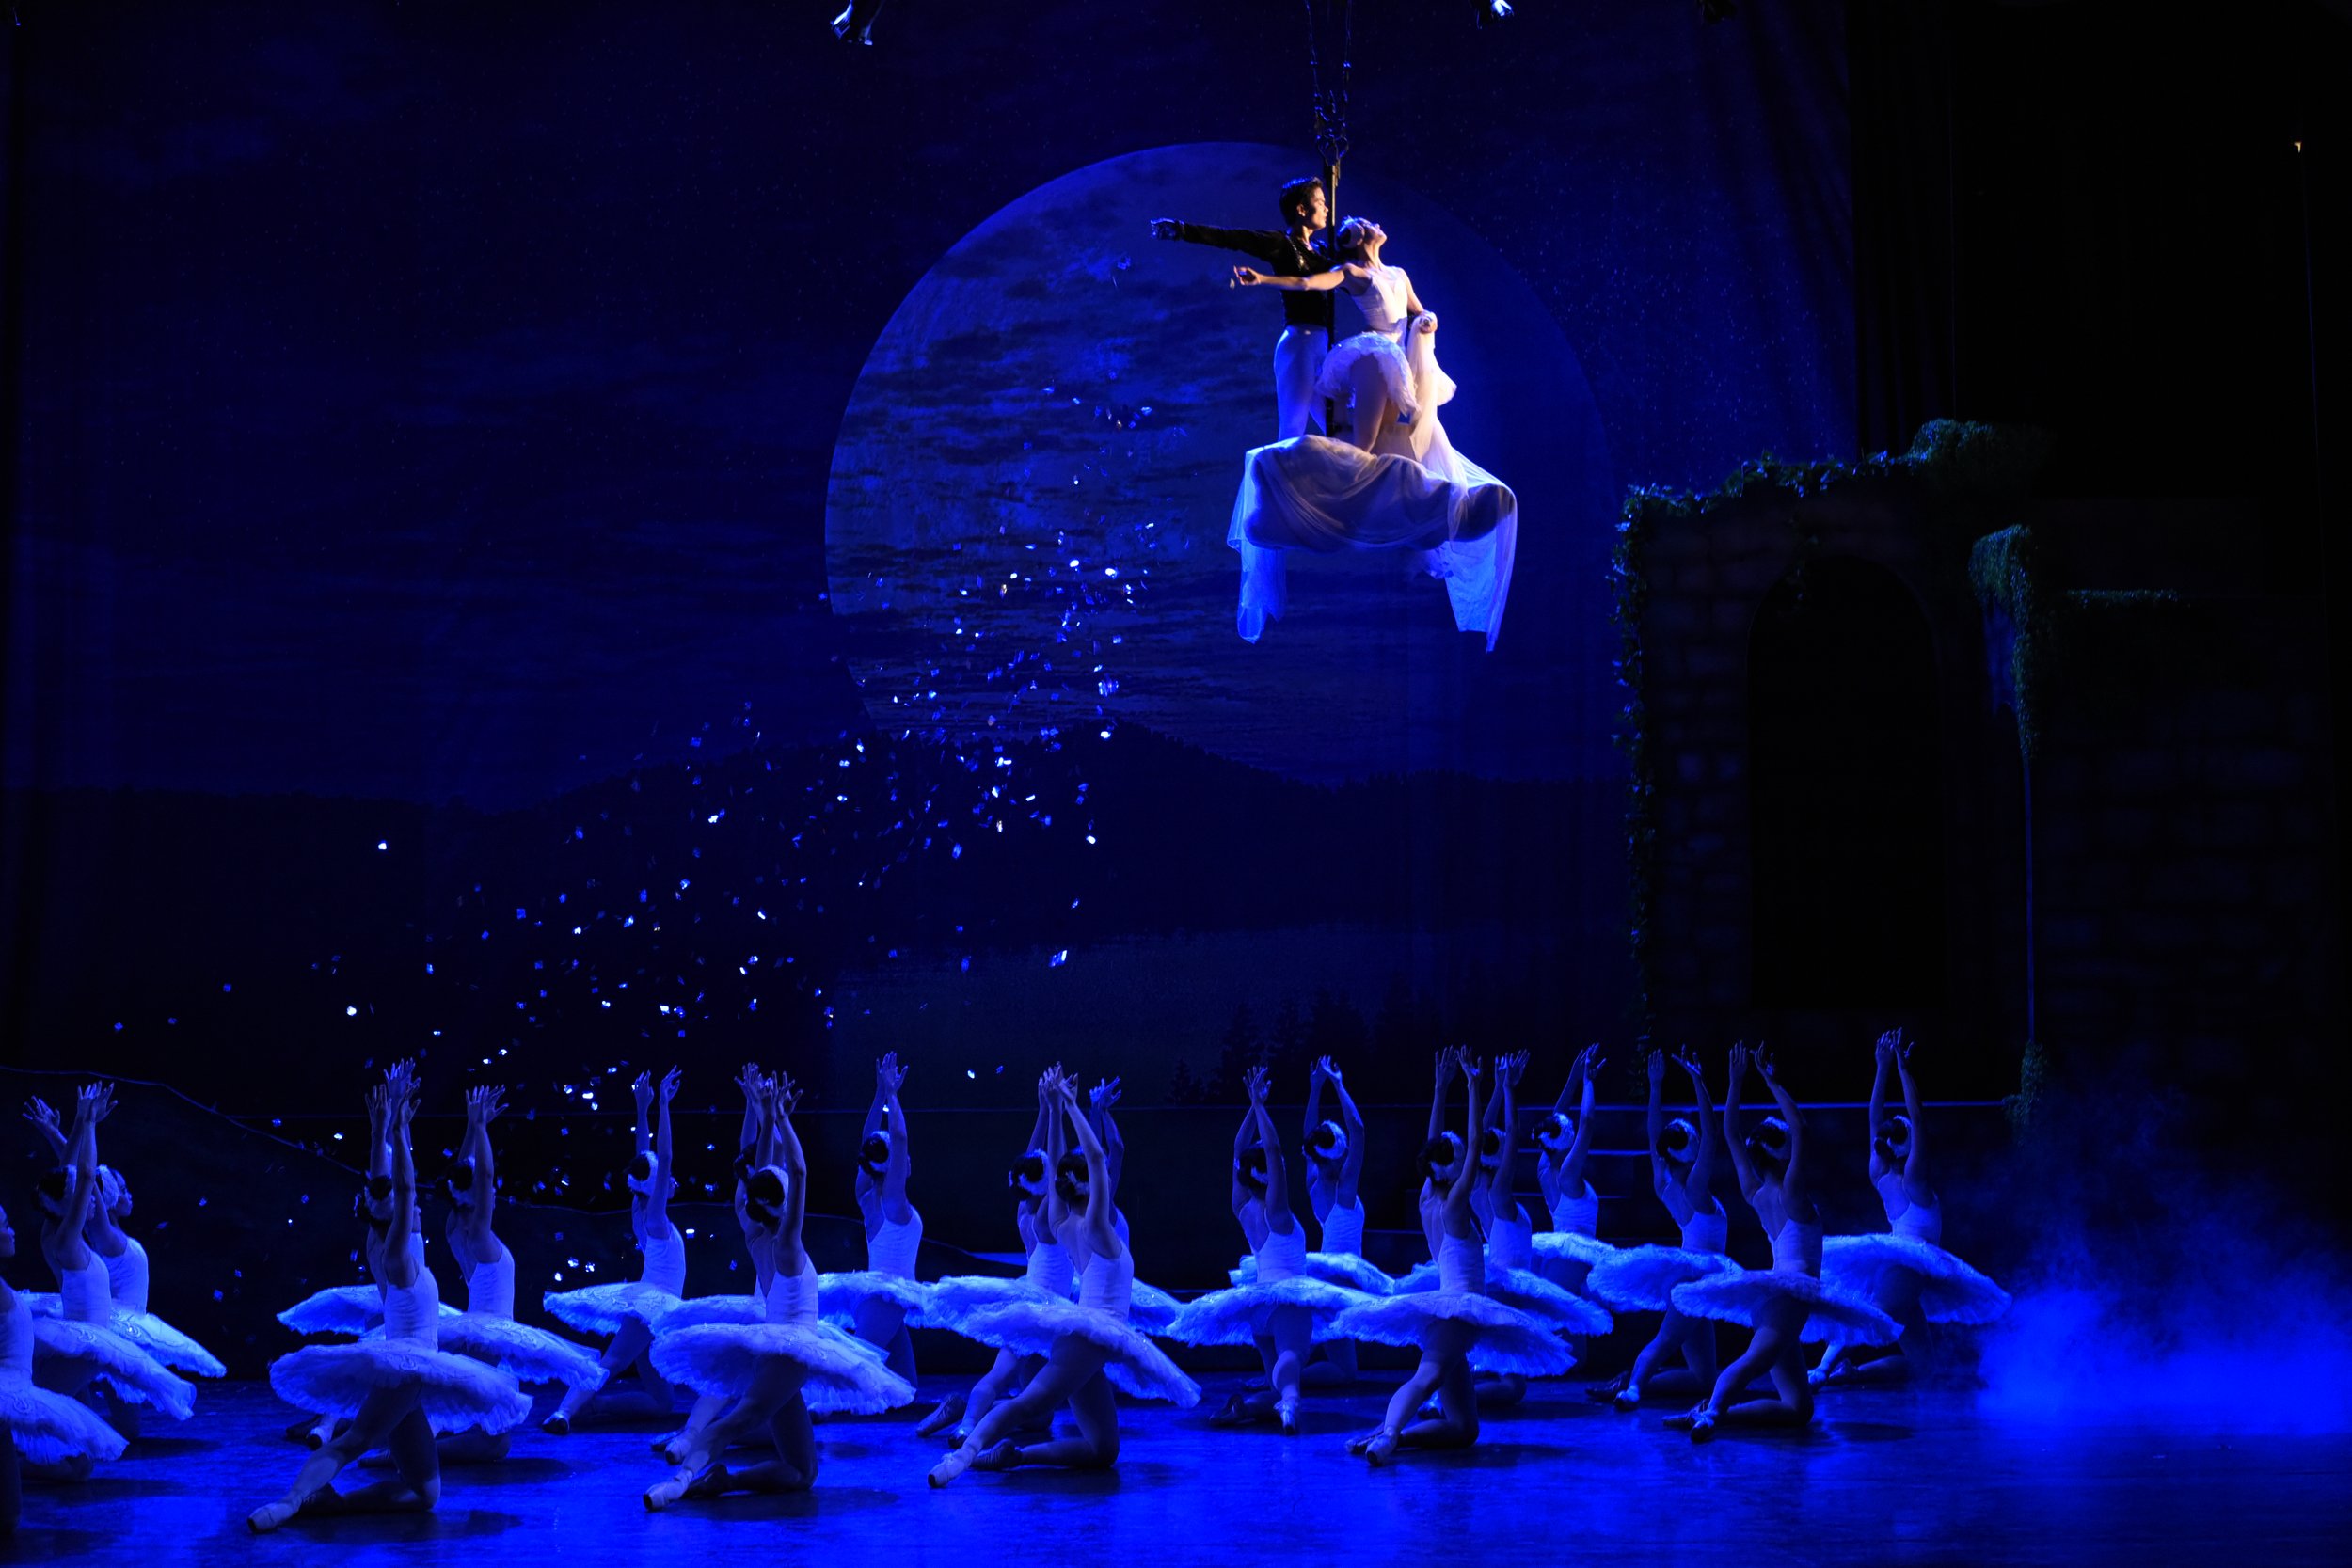    Bathed in the surreal glow of the moon, Odette (Katherine Barkman) and Prince Siegfried (Elpidio Magat) flee, with the enchanted swan maidens below appearing to send them off in  Swan Lake  (2019). After realizing the sorcerer Von Rothbart has tri